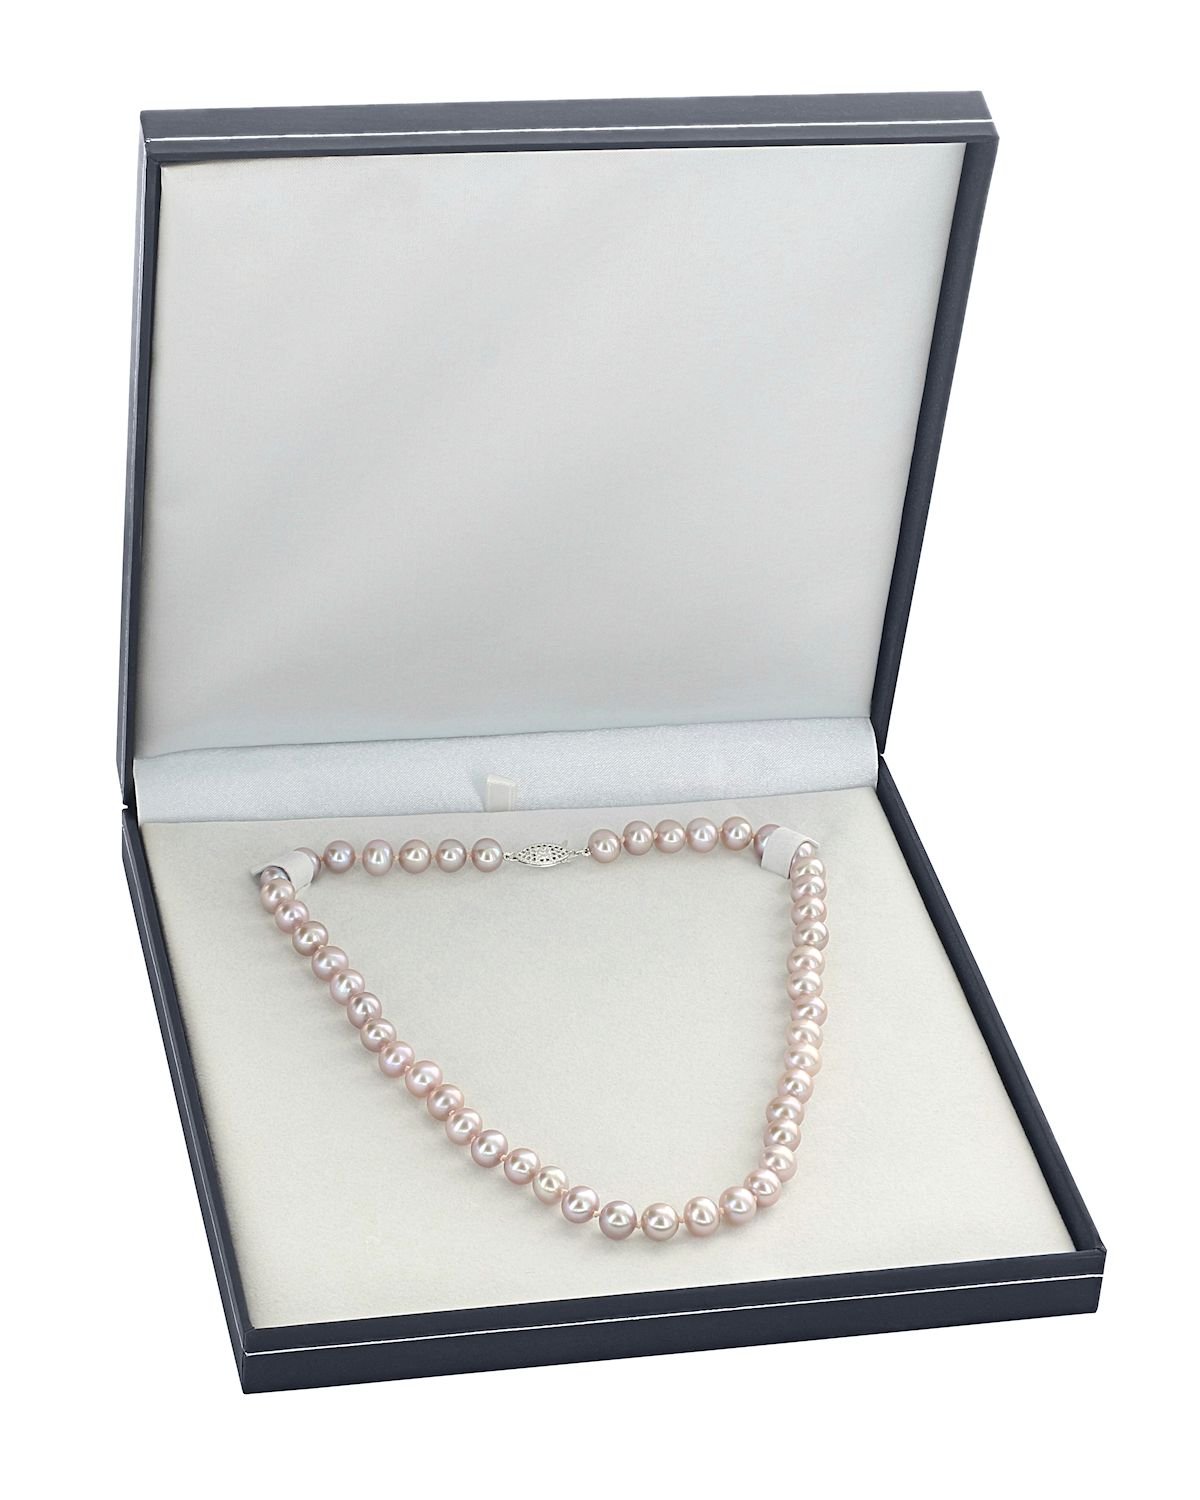 9.5-10.5mm Peach Freshwater Pearl Necklace - AAAA Quality - Secondary Image